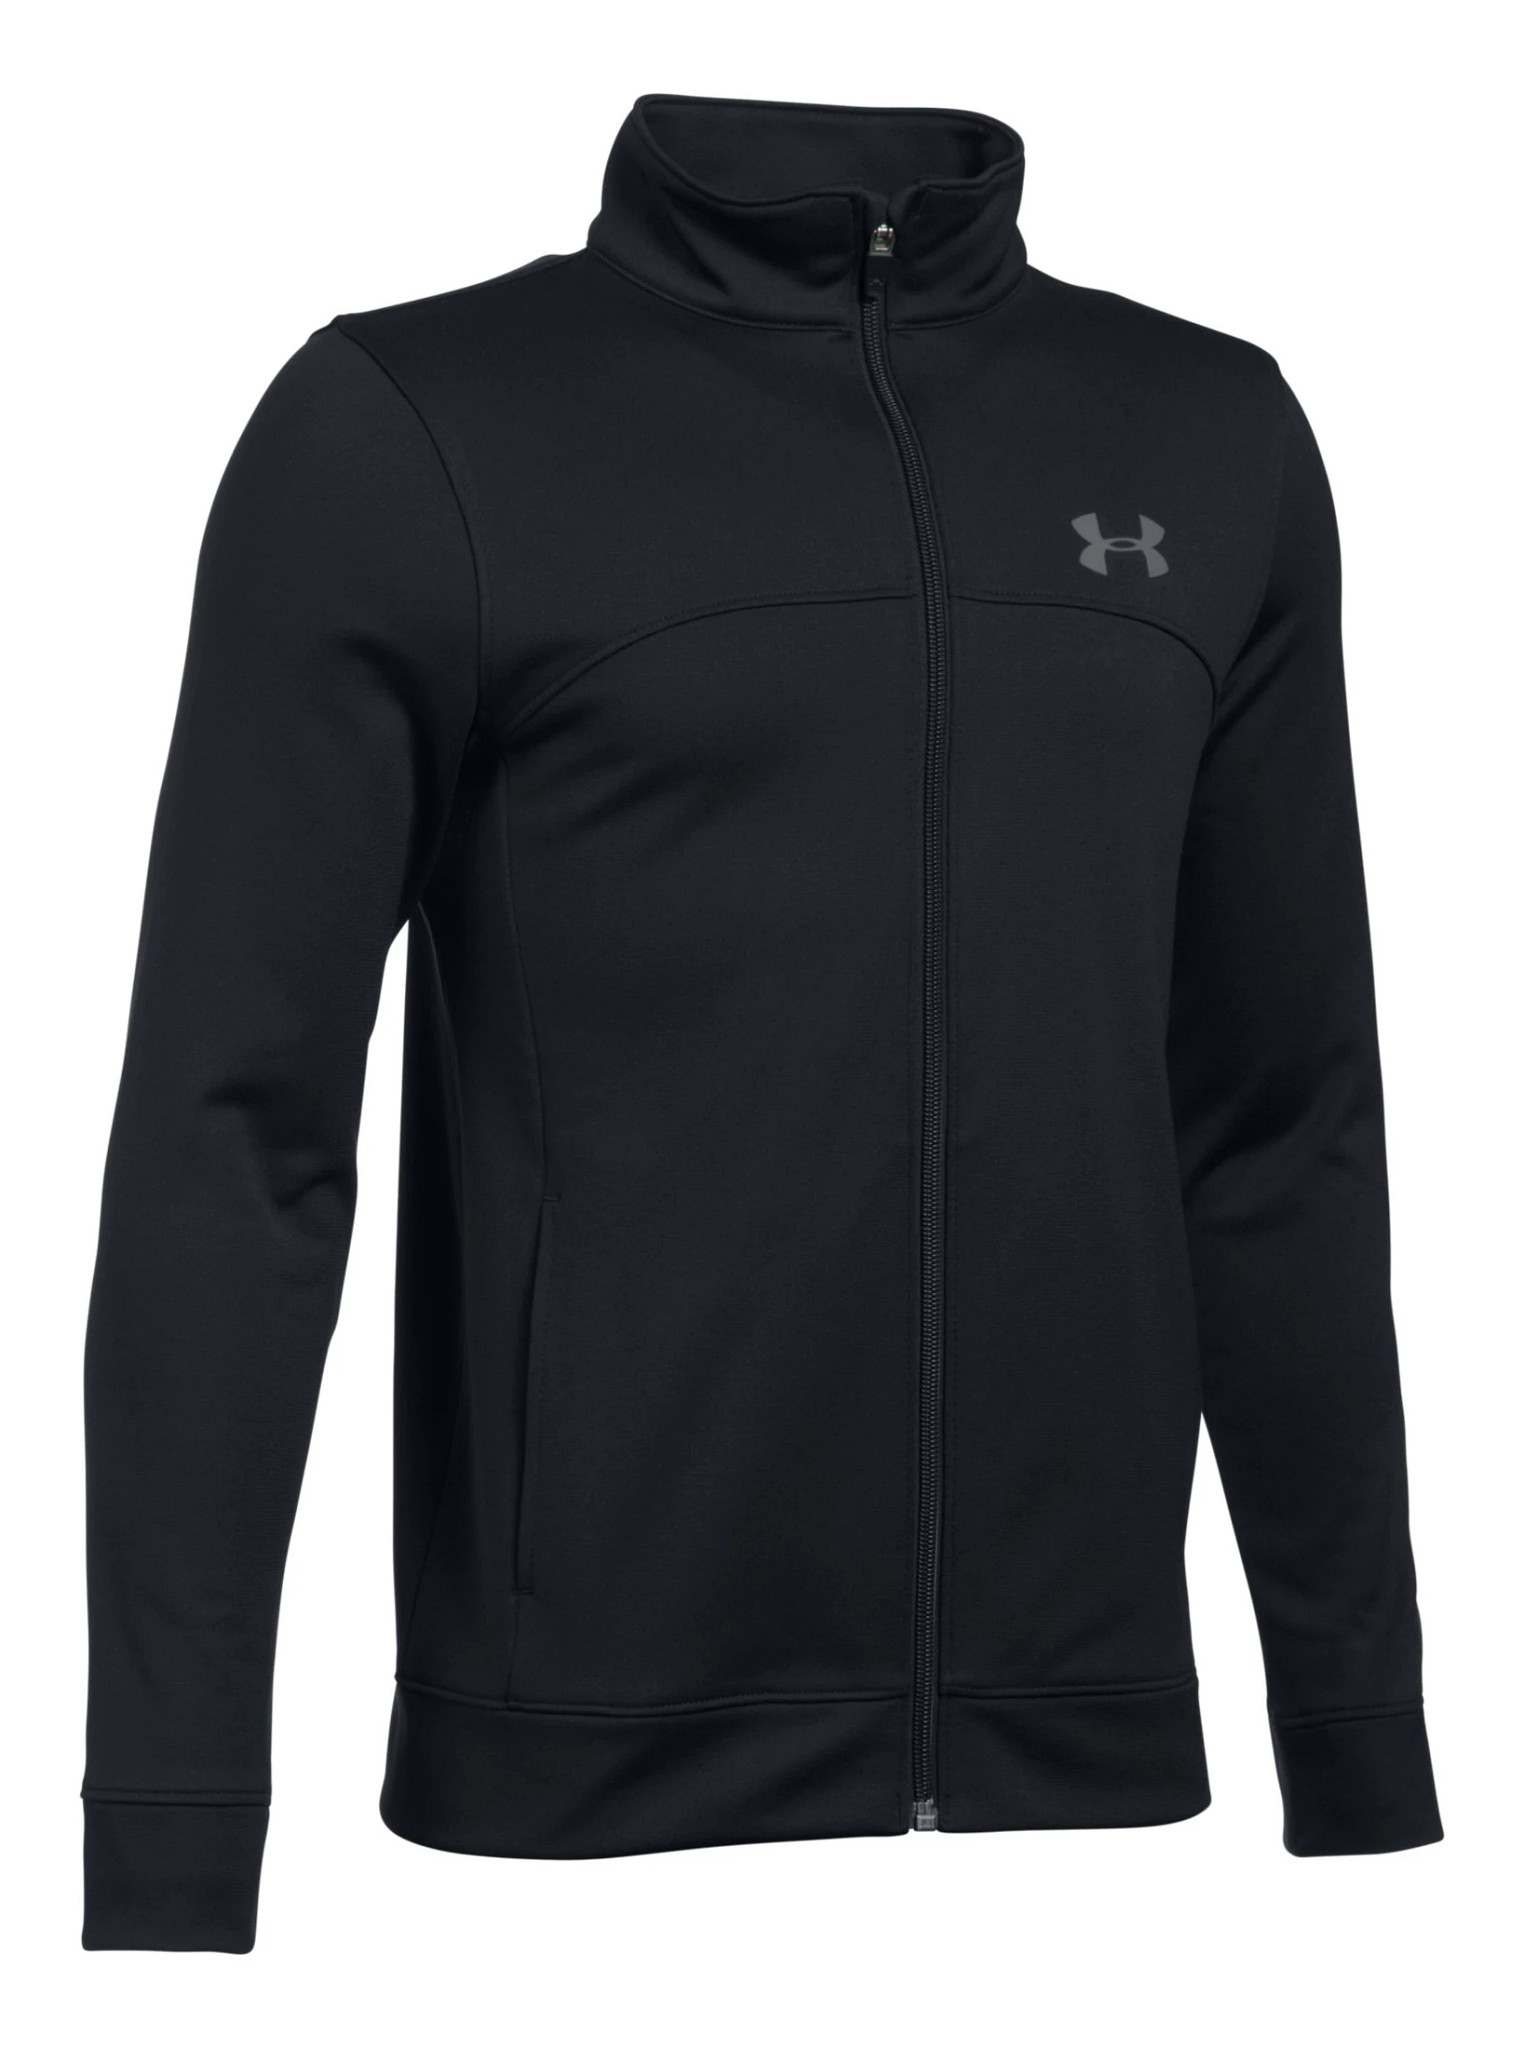 Under Armour Pennant Warm-Up Running Jackets